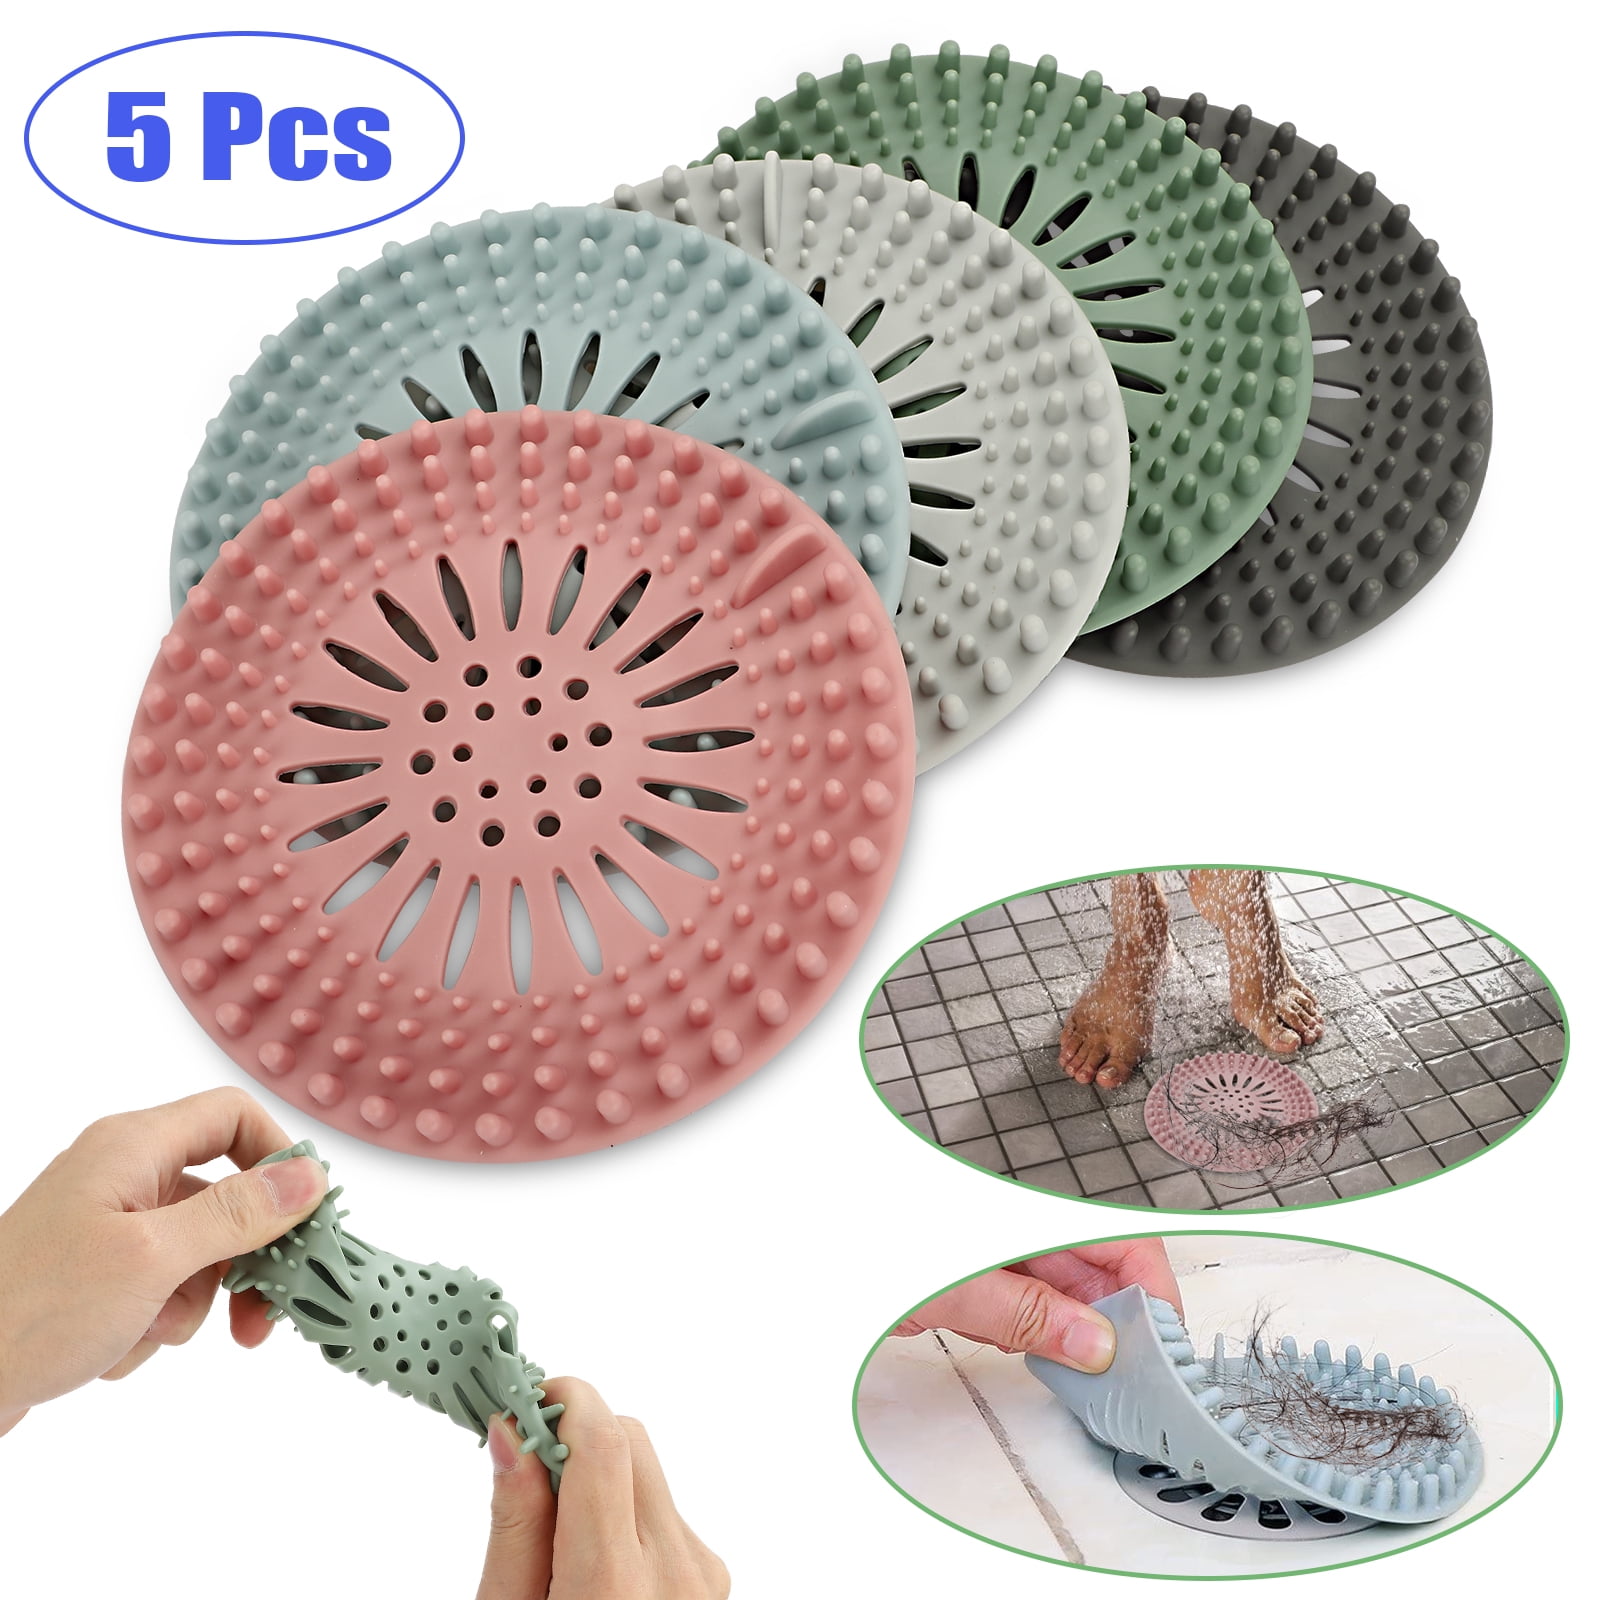 Bathtub Strainer Drain Stopper Sink Protectors Shower Drain Cover Rubber Hair Catchers for FloorLaundryKitchenBathroom Durable and Useful